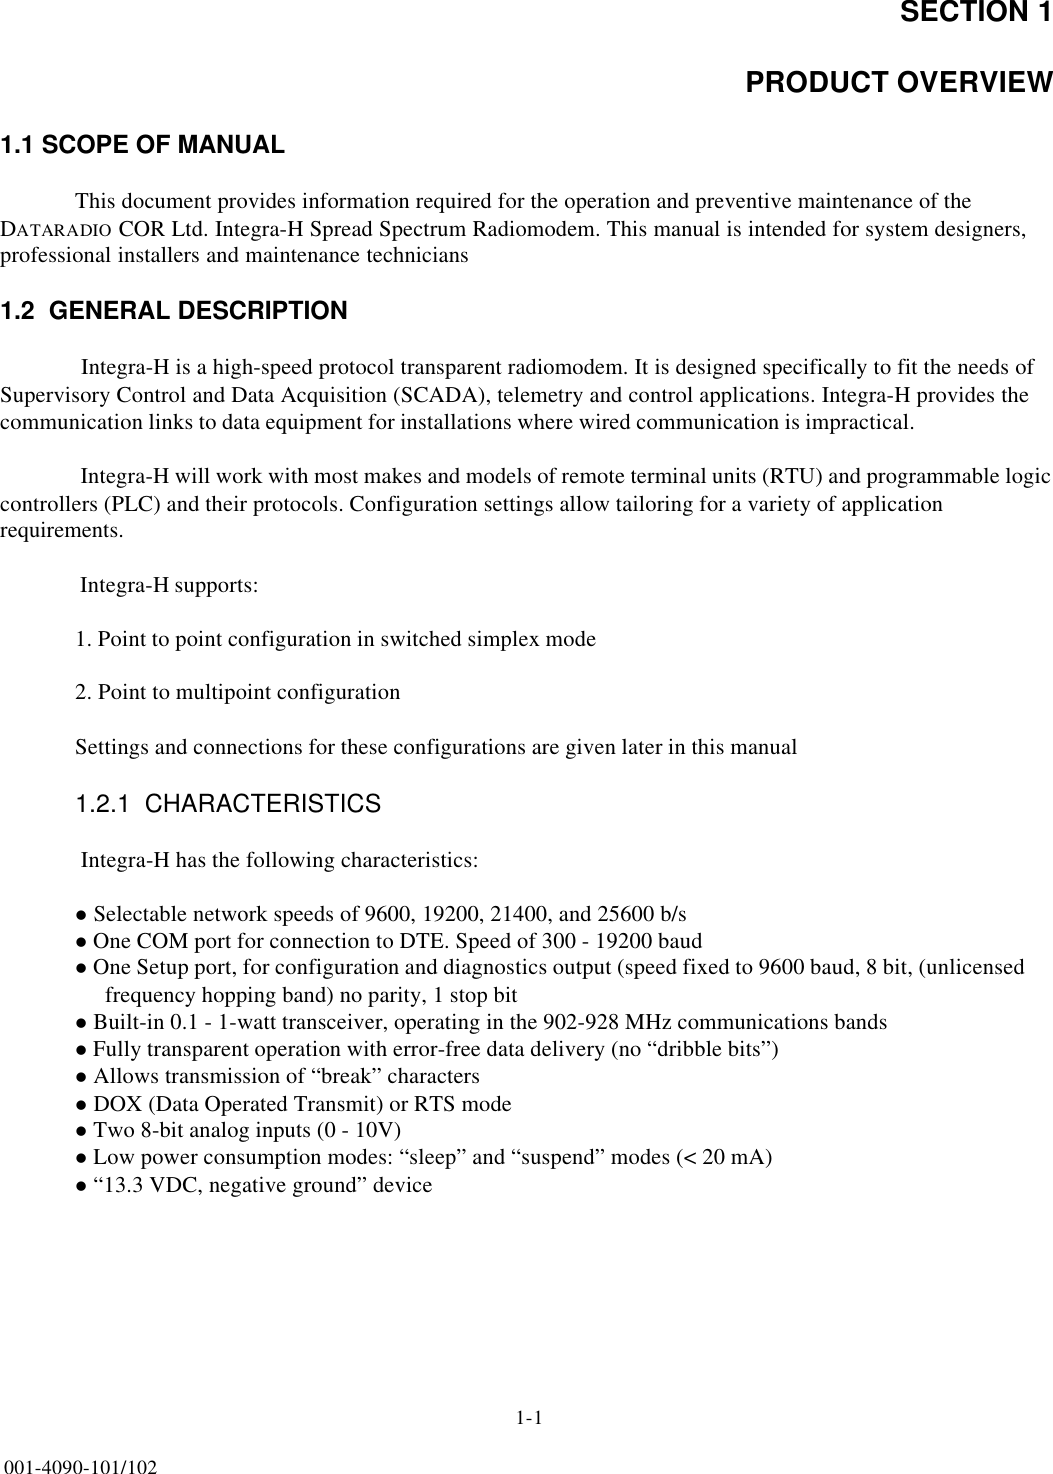 SECTION 11-1001-4090-101/102PRODUCT OVERVIEW1.1 SCOPE OF MANUALThis document provides information required for the operation and preventive maintenance of the DATARADIO COR Ltd. Integra-H Spread Spectrum Radiomodem. This manual is intended for system designers, professional installers and maintenance technicians1.2  GENERAL DESCRIPTION Integra-H is a high-speed protocol transparent radiomodem. It is designed specifically to fit the needs of Supervisory Control and Data Acquisition (SCADA), telemetry and control applications. Integra-H provides the communication links to data equipment for installations where wired communication is impractical. Integra-H will work with most makes and models of remote terminal units (RTU) and programmable logic controllers (PLC) and their protocols. Configuration settings allow tailoring for a variety of application requirements. Integra-H supports:1. Point to point configuration in switched simplex mode2. Point to multipoint configuration Settings and connections for these configurations are given later in this manual1.2.1  CHARACTERISTICS Integra-H has the following characteristics:l Selectable network speeds of 9600, 19200, 21400, and 25600 b/s l One COM port for connection to DTE. Speed of 300 - 19200 baudl One Setup port, for configuration and diagnostics output (speed fixed to 9600 baud, 8 bit, (unlicensed     frequency hopping band) no parity, 1 stop bitl Built-in 0.1 - 1-watt transceiver, operating in the 902-928 MHz communications bandsl Fully transparent operation with error-free data delivery (no “dribble bits”)l Allows transmission of “break” charactersl DOX (Data Operated Transmit) or RTS mode l Two 8-bit analog inputs (0 - 10V)l Low power consumption modes: “sleep” and “suspend” modes (&lt; 20 mA)l “13.3 VDC, negative ground” device